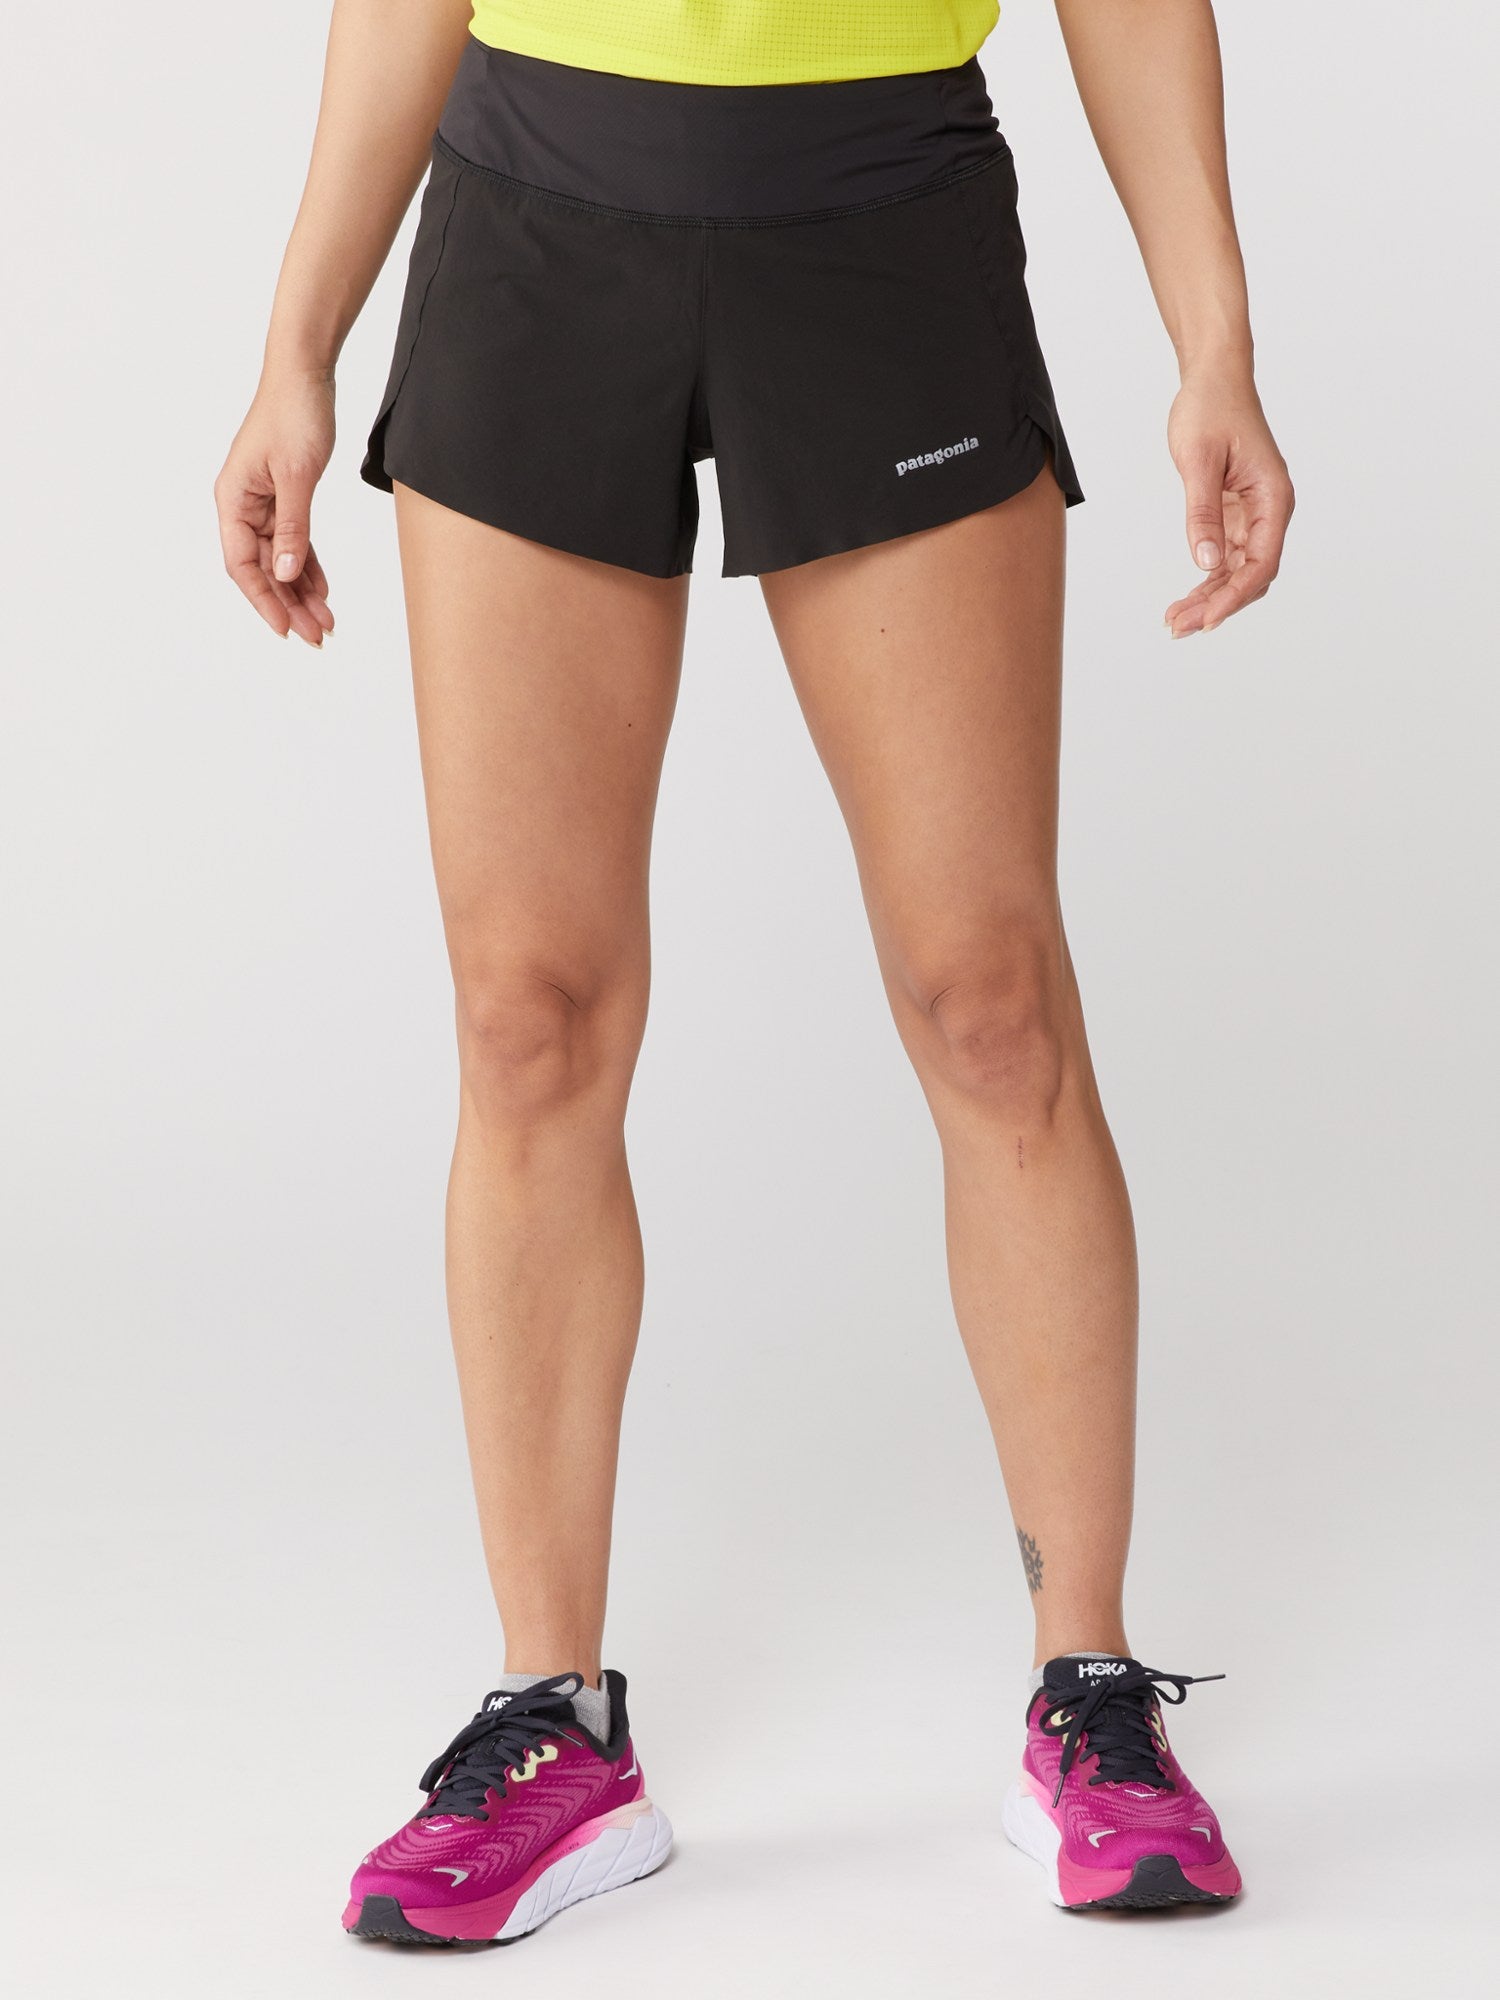 Women's Fortify 3 Hot Short - View All